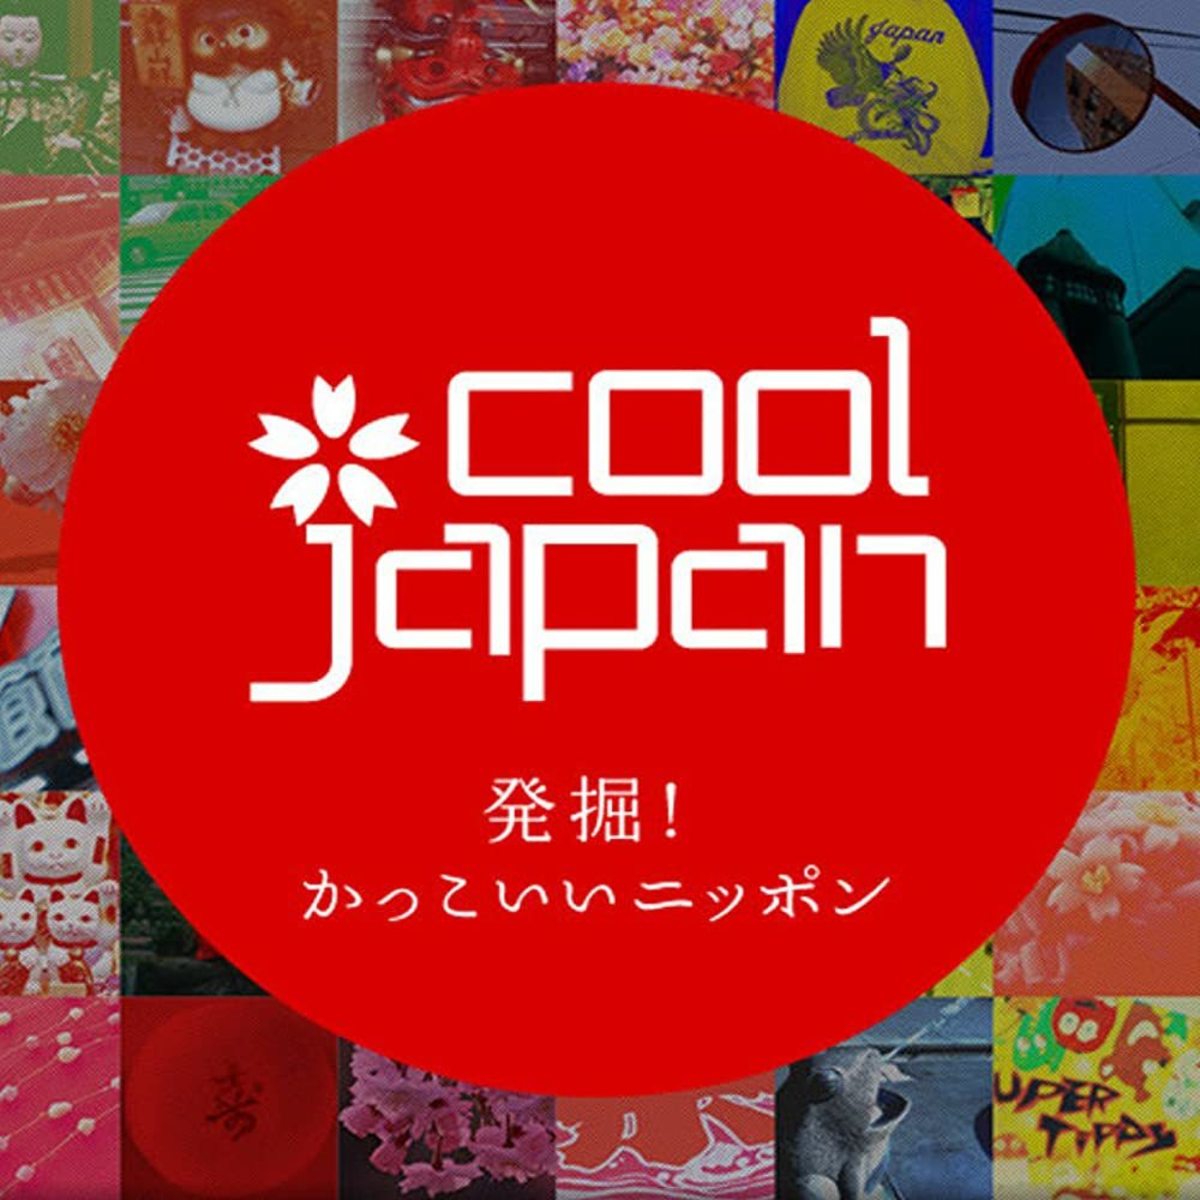 Cover of Tv series “Cool japan” - 2005